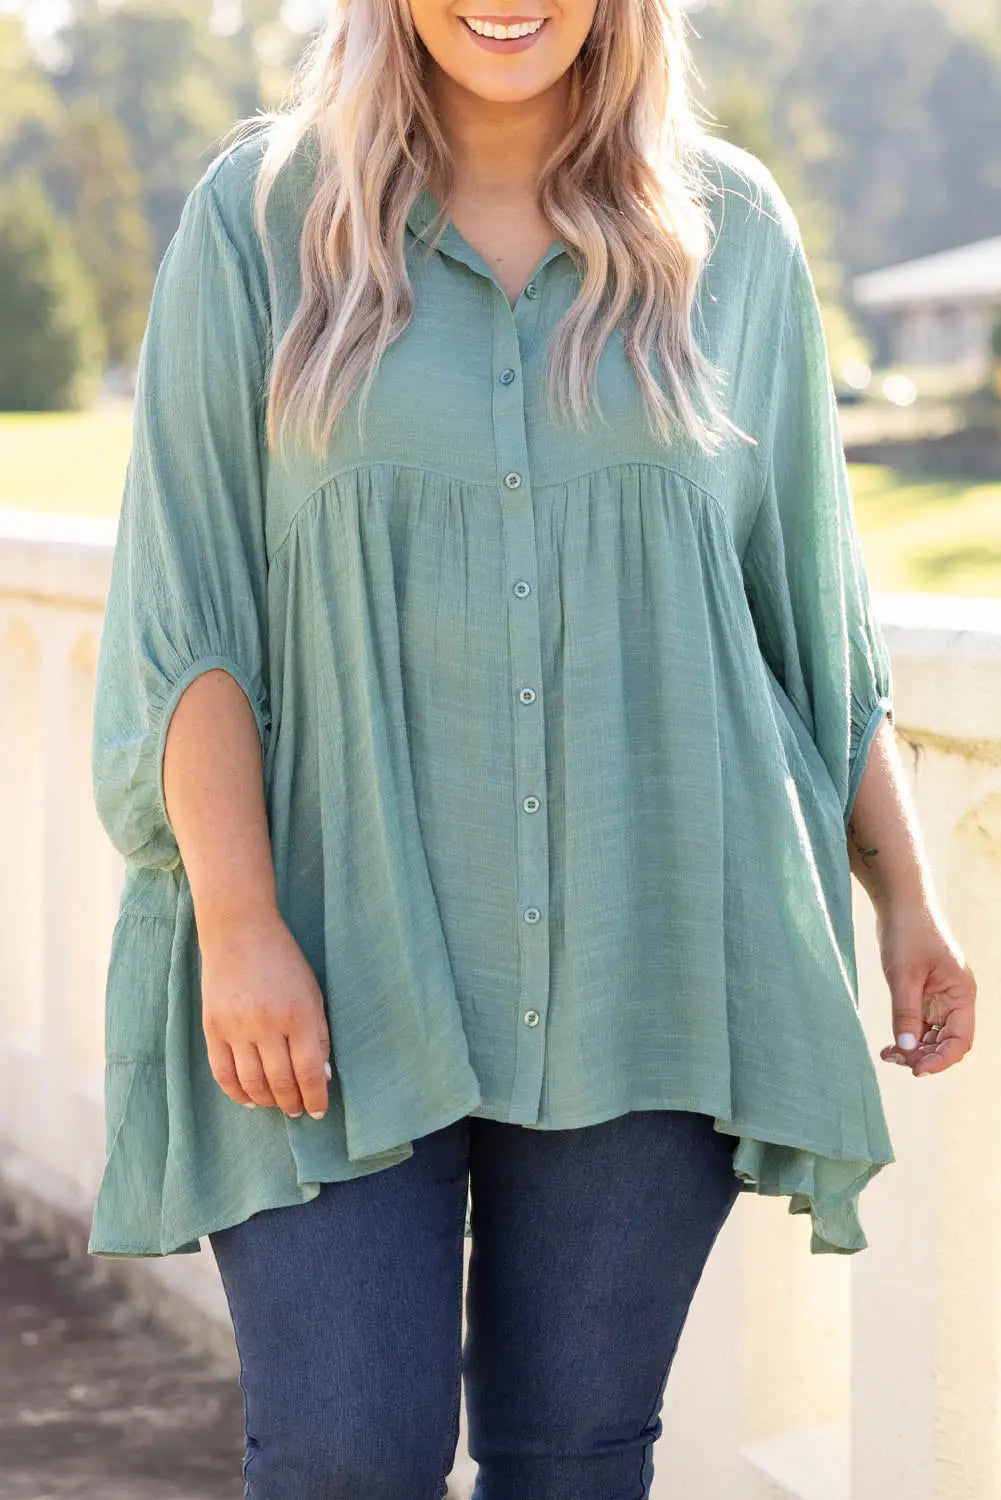 Green 3/4 sleeve plus size tunic top - 1x / 100% polyester